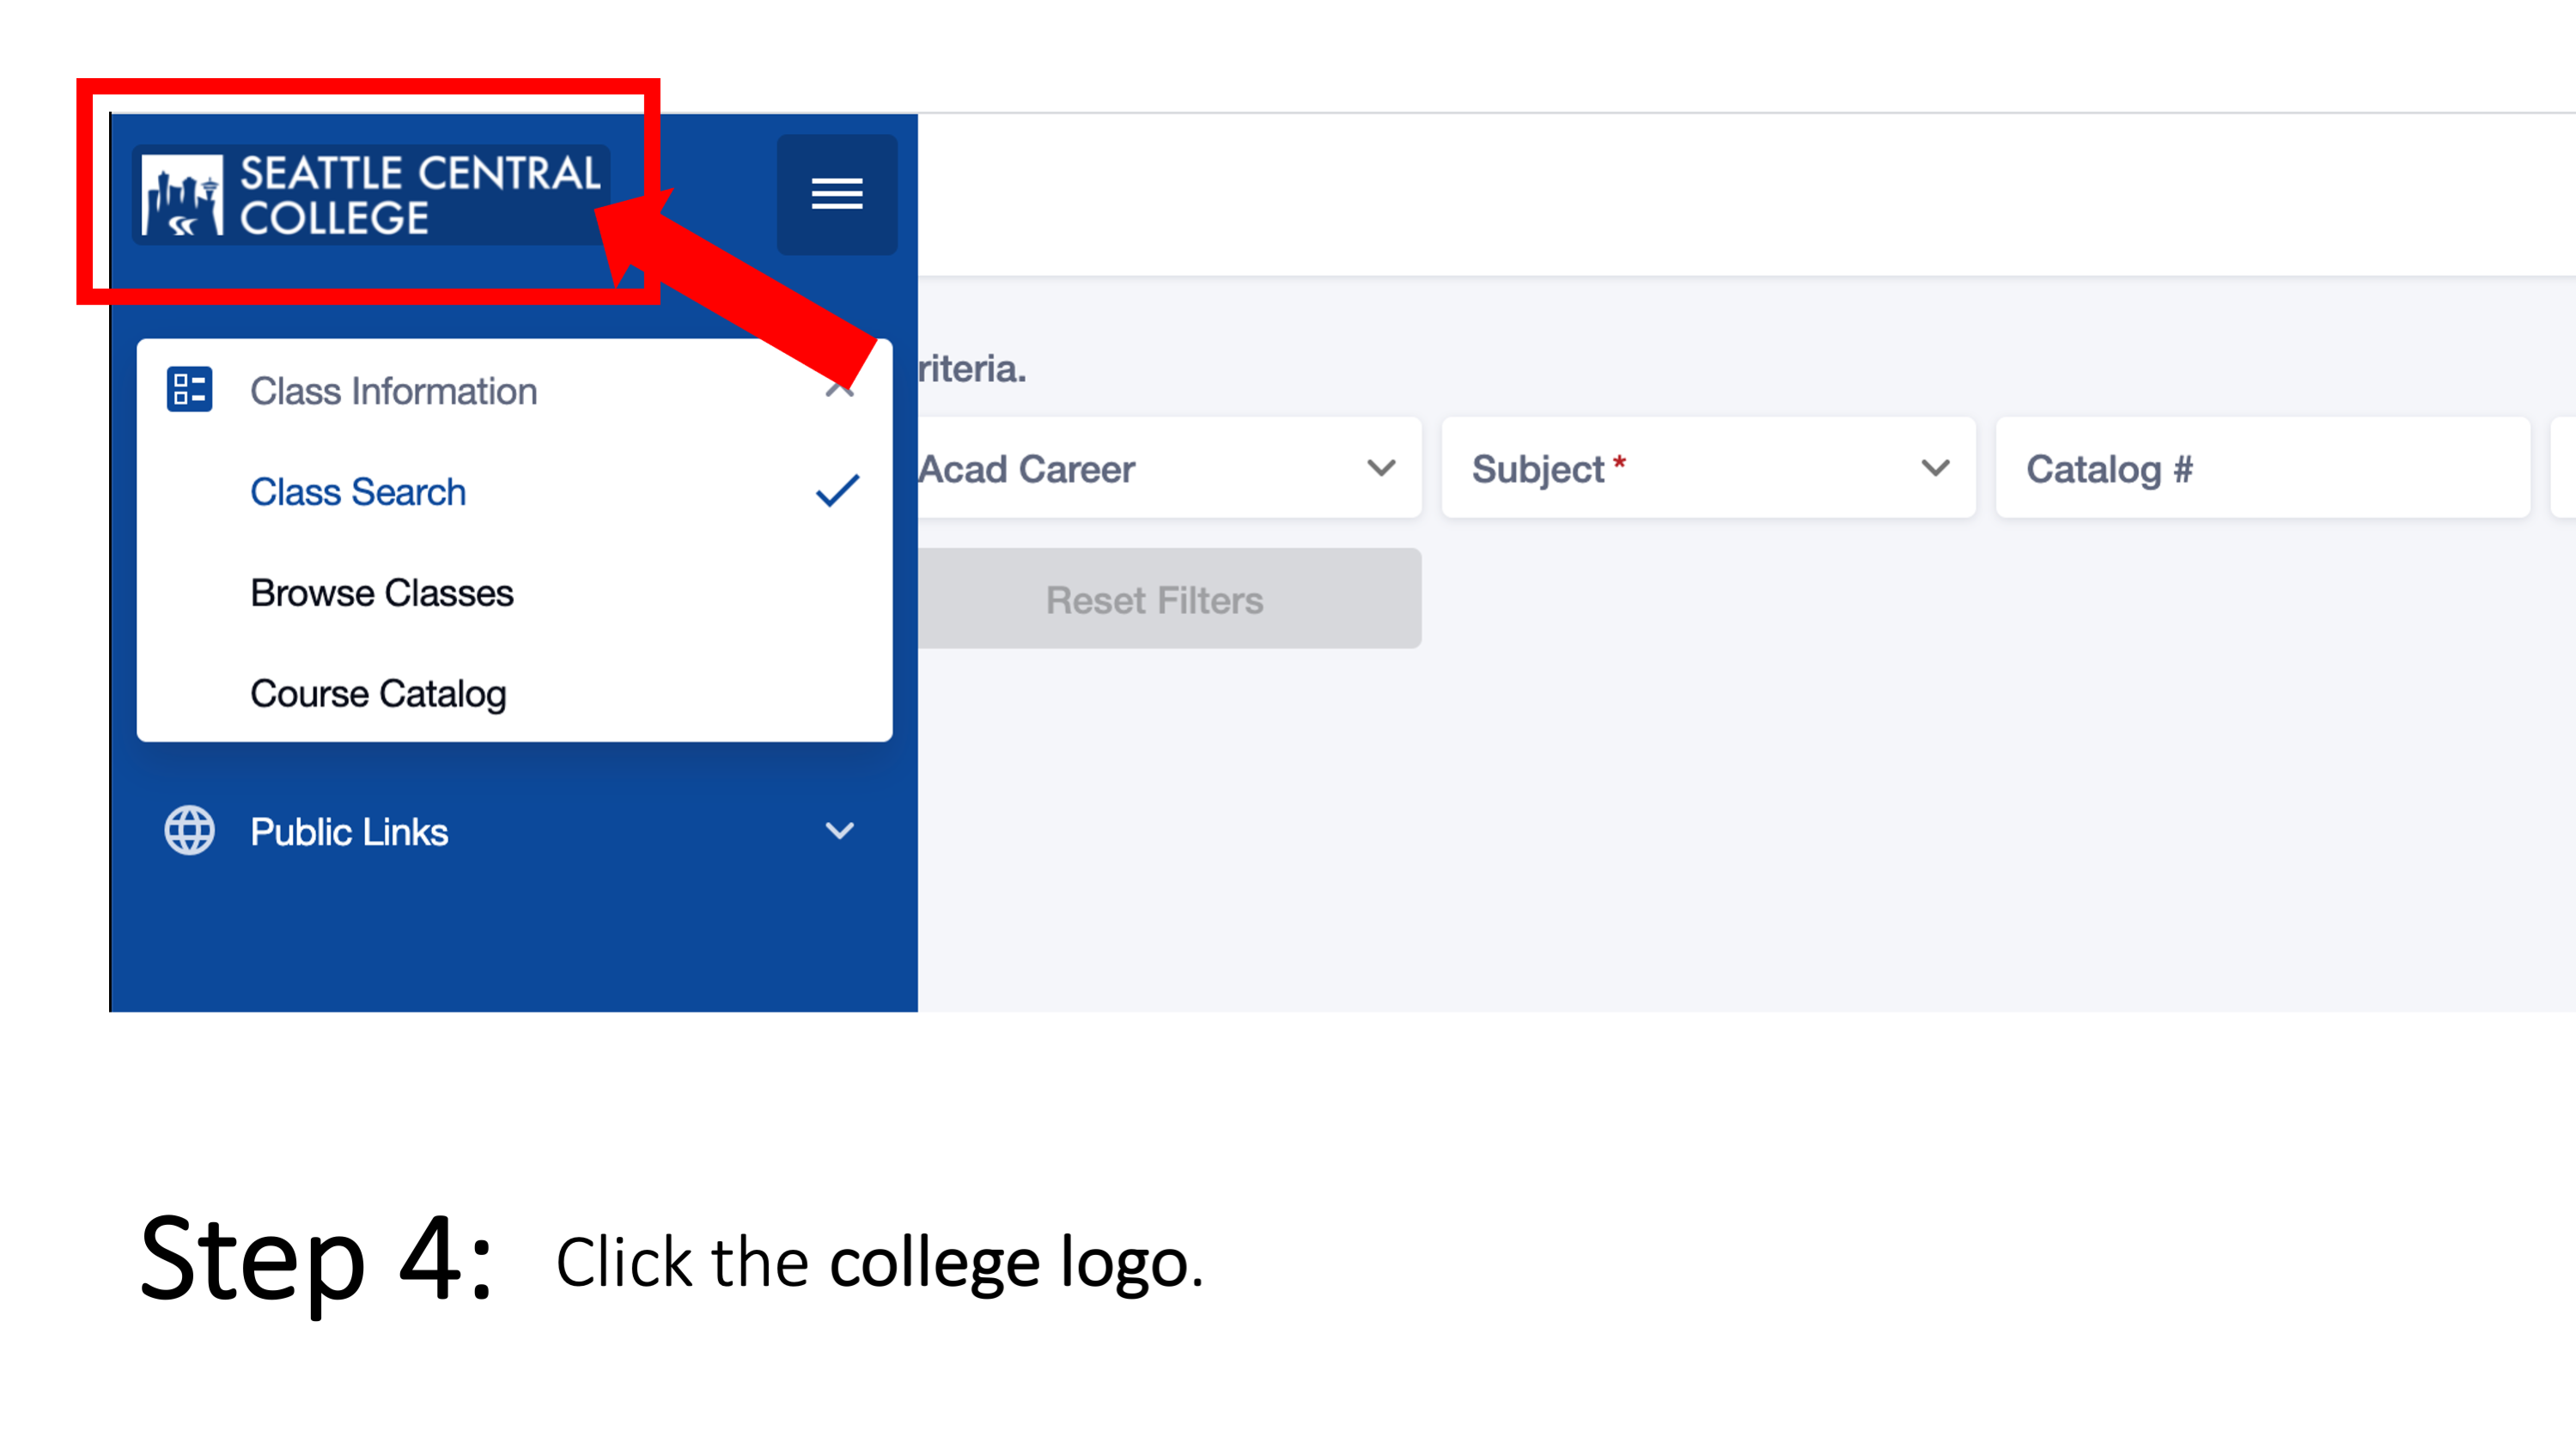 Step 4: Click the college logo.